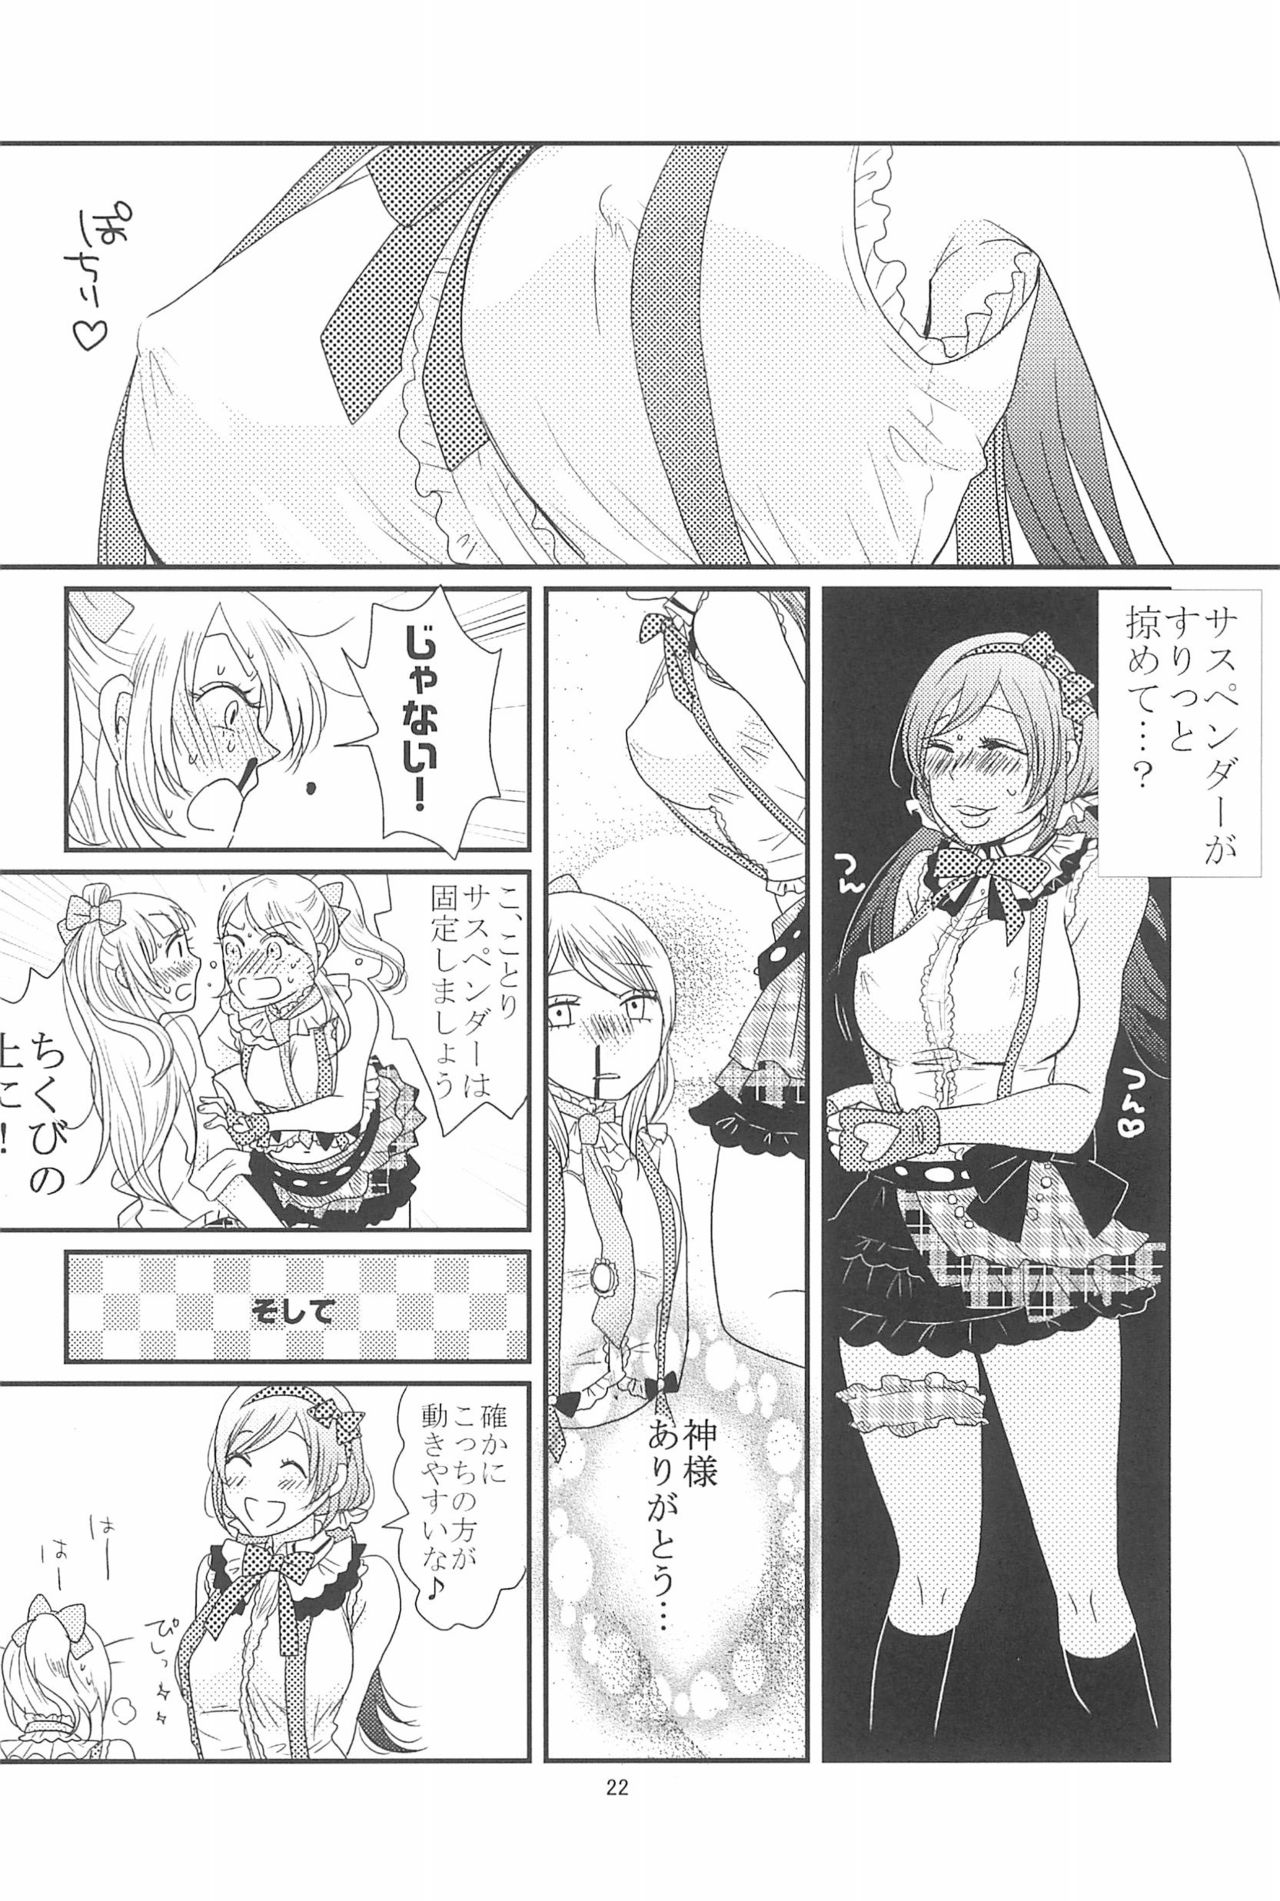 (C90) [BK*N2 (Mikawa Miso)] HAPPY GO LUCKY DAYS (Love Live!) page 26 full